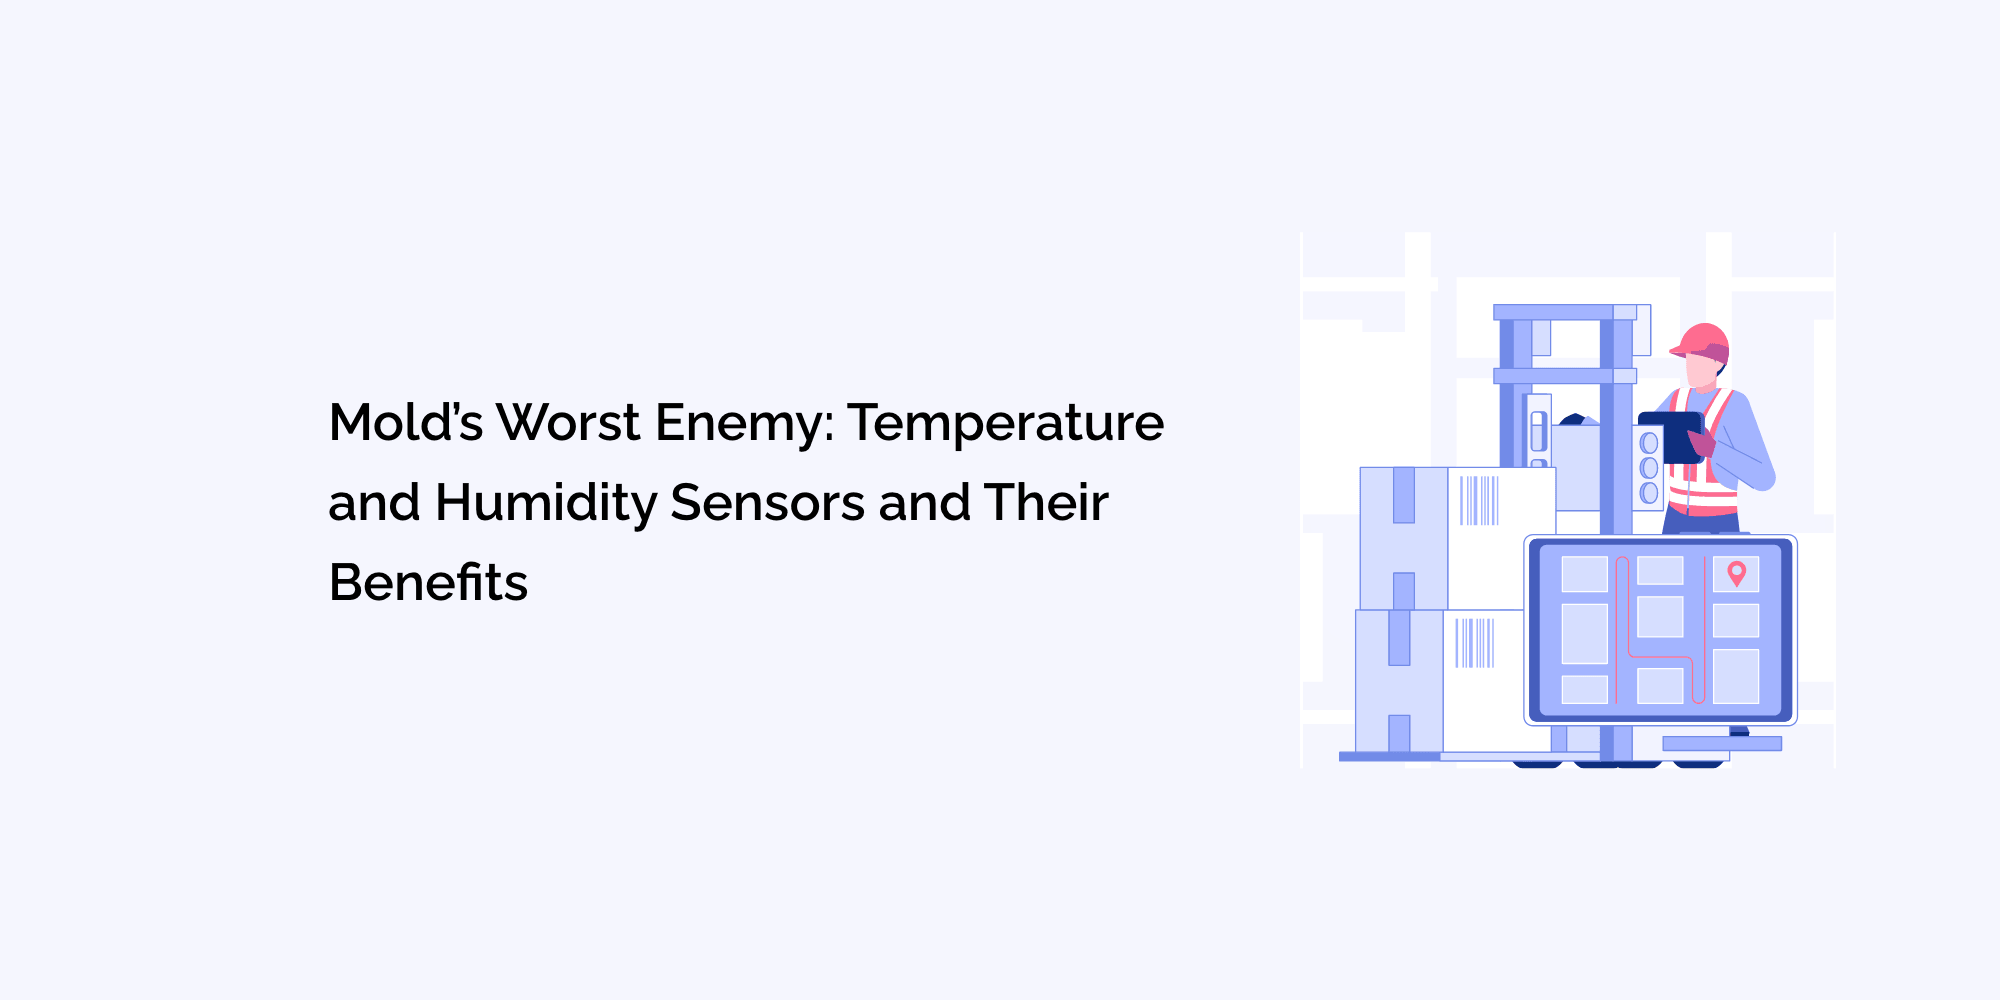 Mold's Worst Enemy: Temperature and Humidity Sensors and Their Benefits